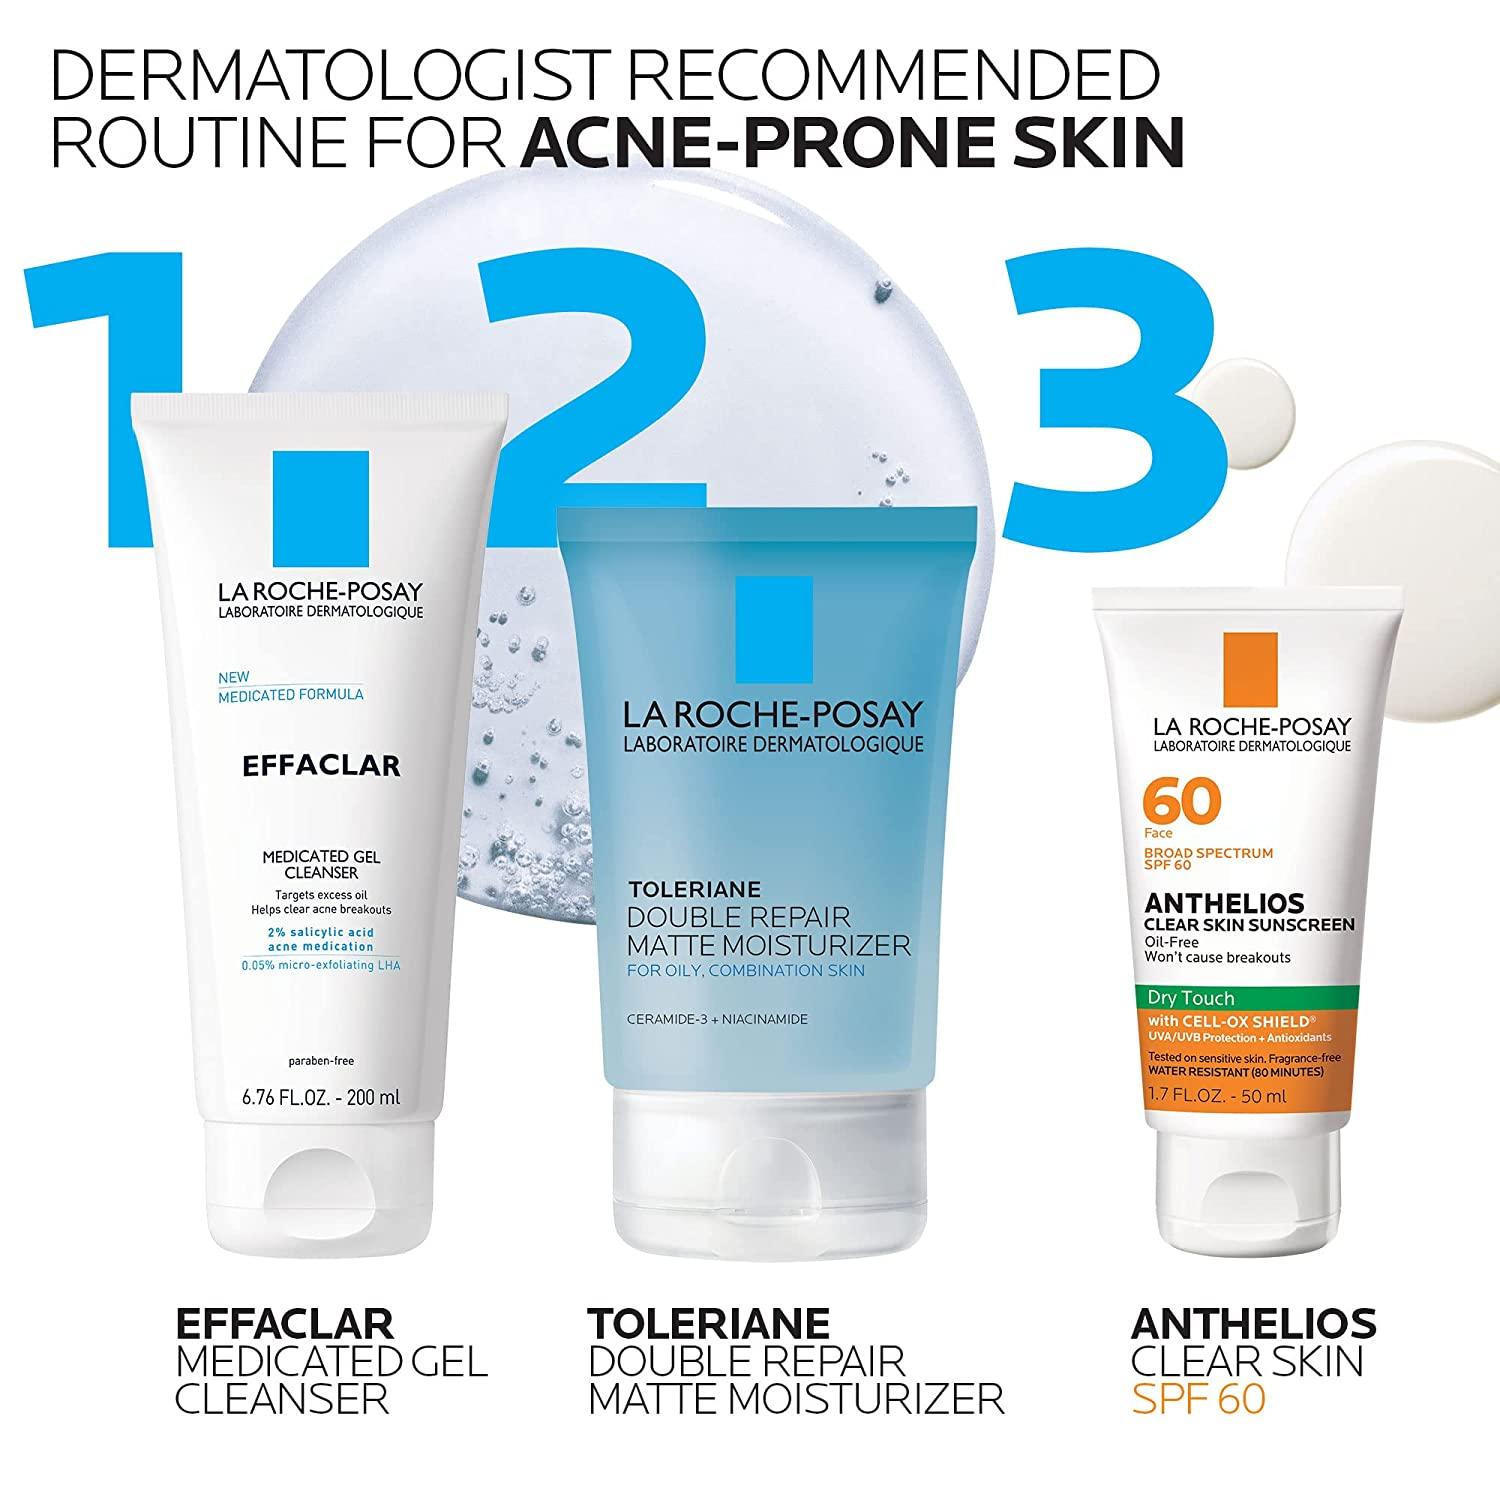 Saucer Overfrakke spin La Roche-Posay Anthelios Clear Skin Dry Touch Sunscreen SPF 60, Oil Free  Face Sunscreen for Acne Prone Skin, Won't Cause Breakouts, Non-Greasy,  Oxybenzone Free